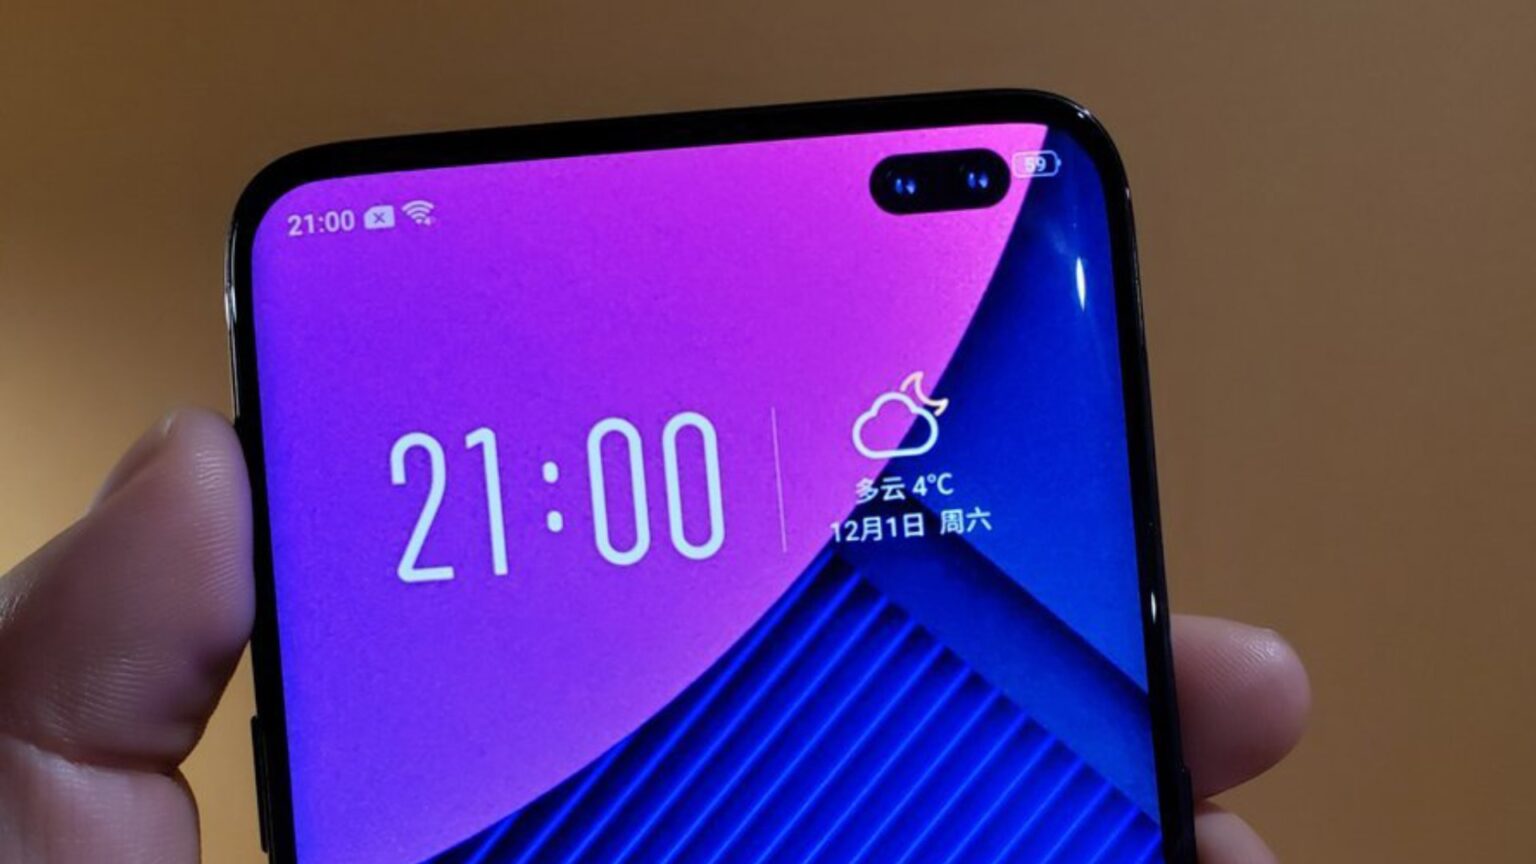 Samsung Galaxy S10+ Takes First Place in DxOMark Selfie Ranking